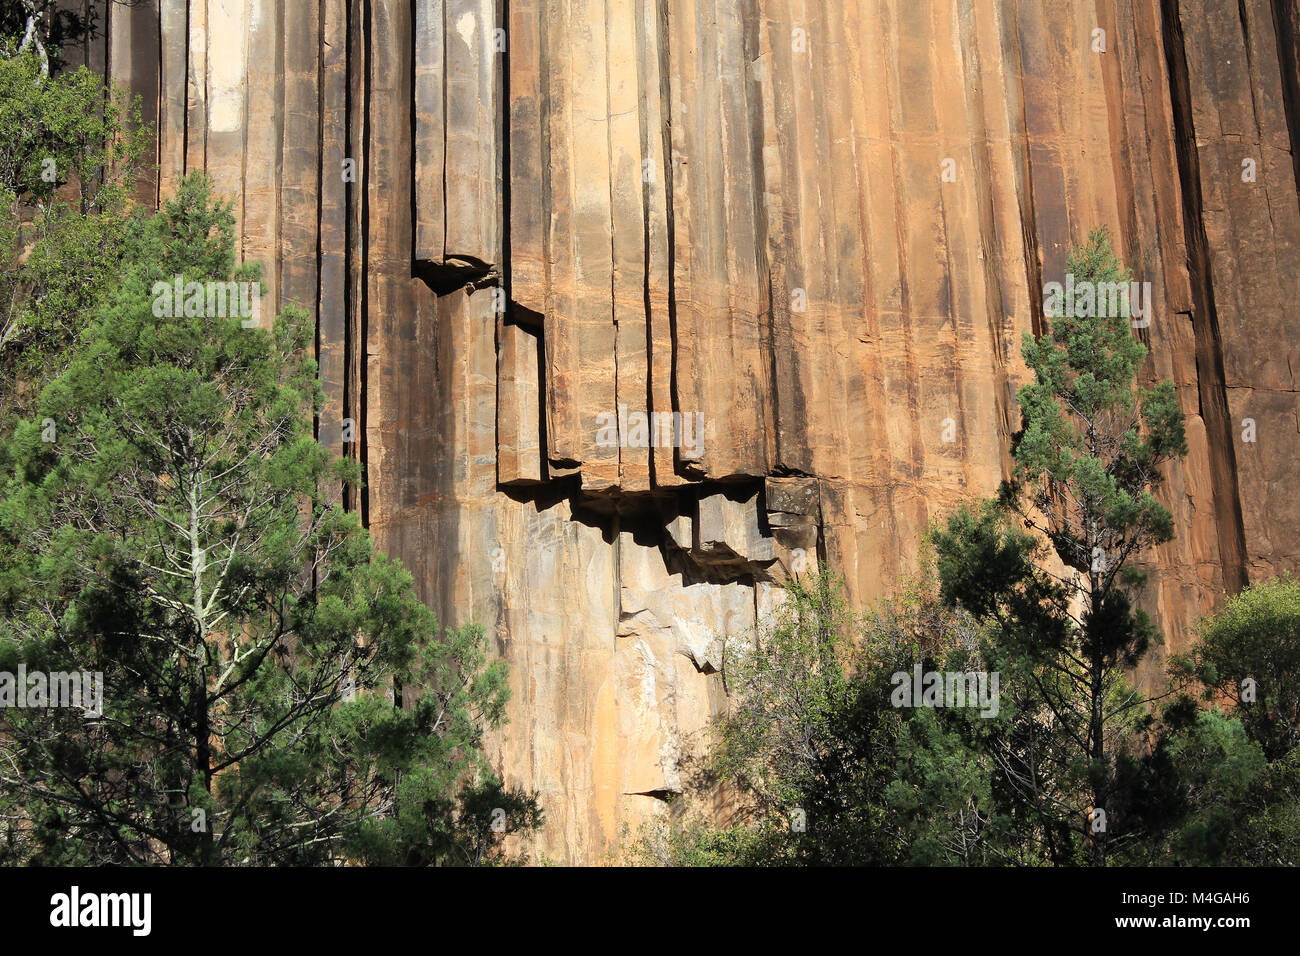 The ancient volcanic rock formation has created the organ-piping effect at Sawn Rocks, Narrabri, New South Wales, Australia. Stock Photo